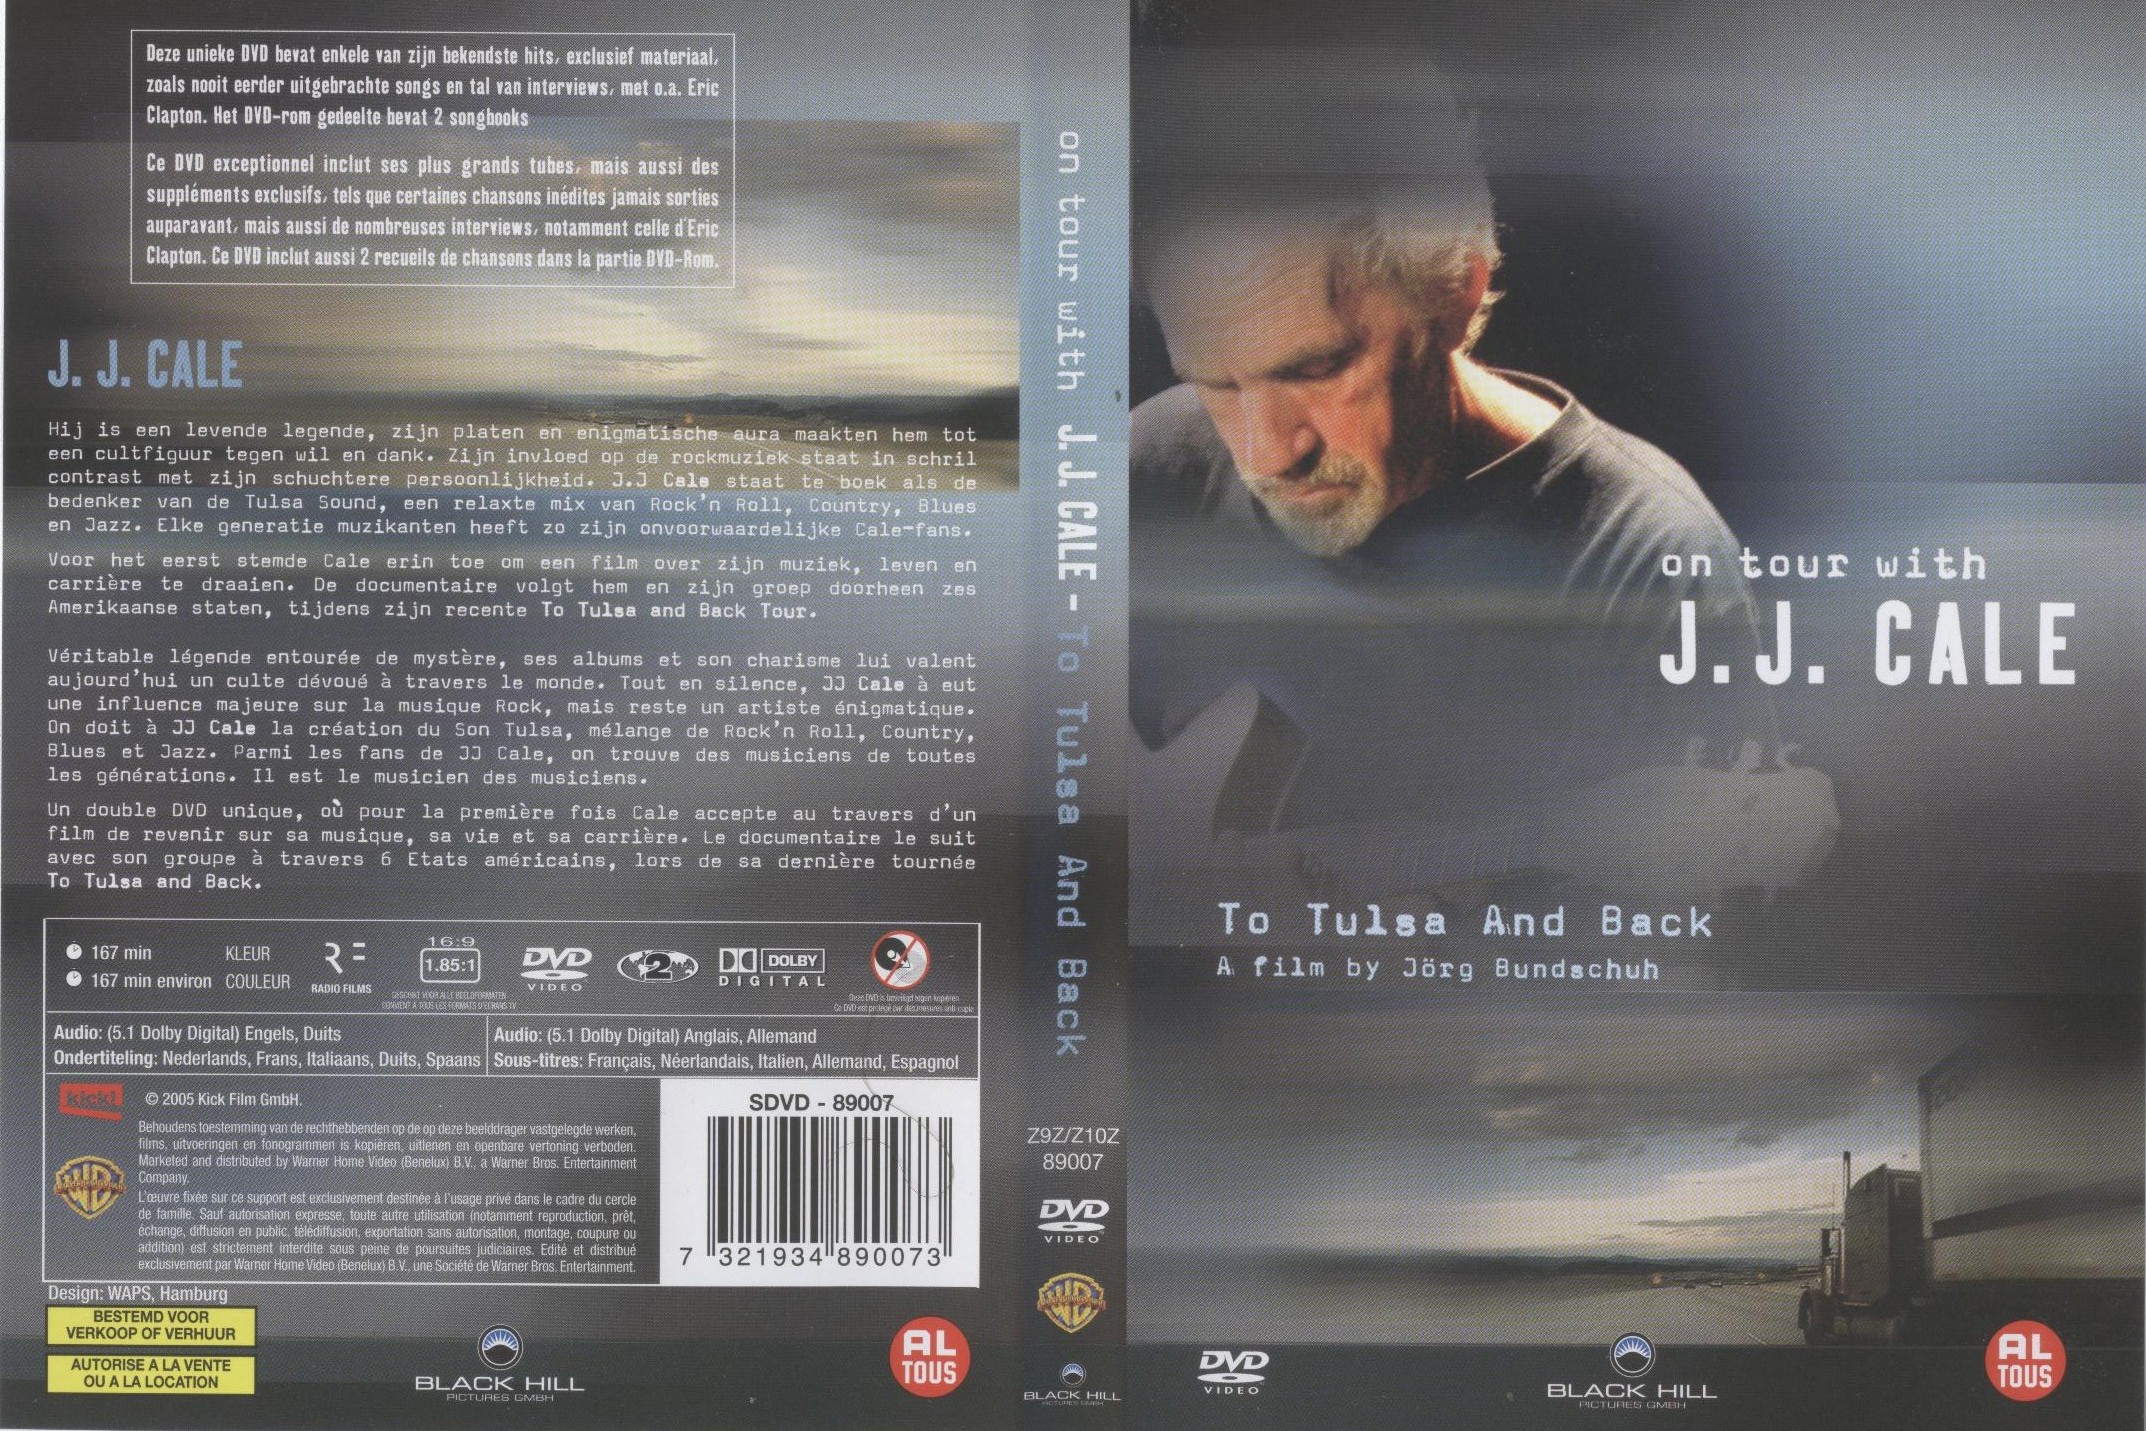 Jaquette DVD JJ-Cale on tour with